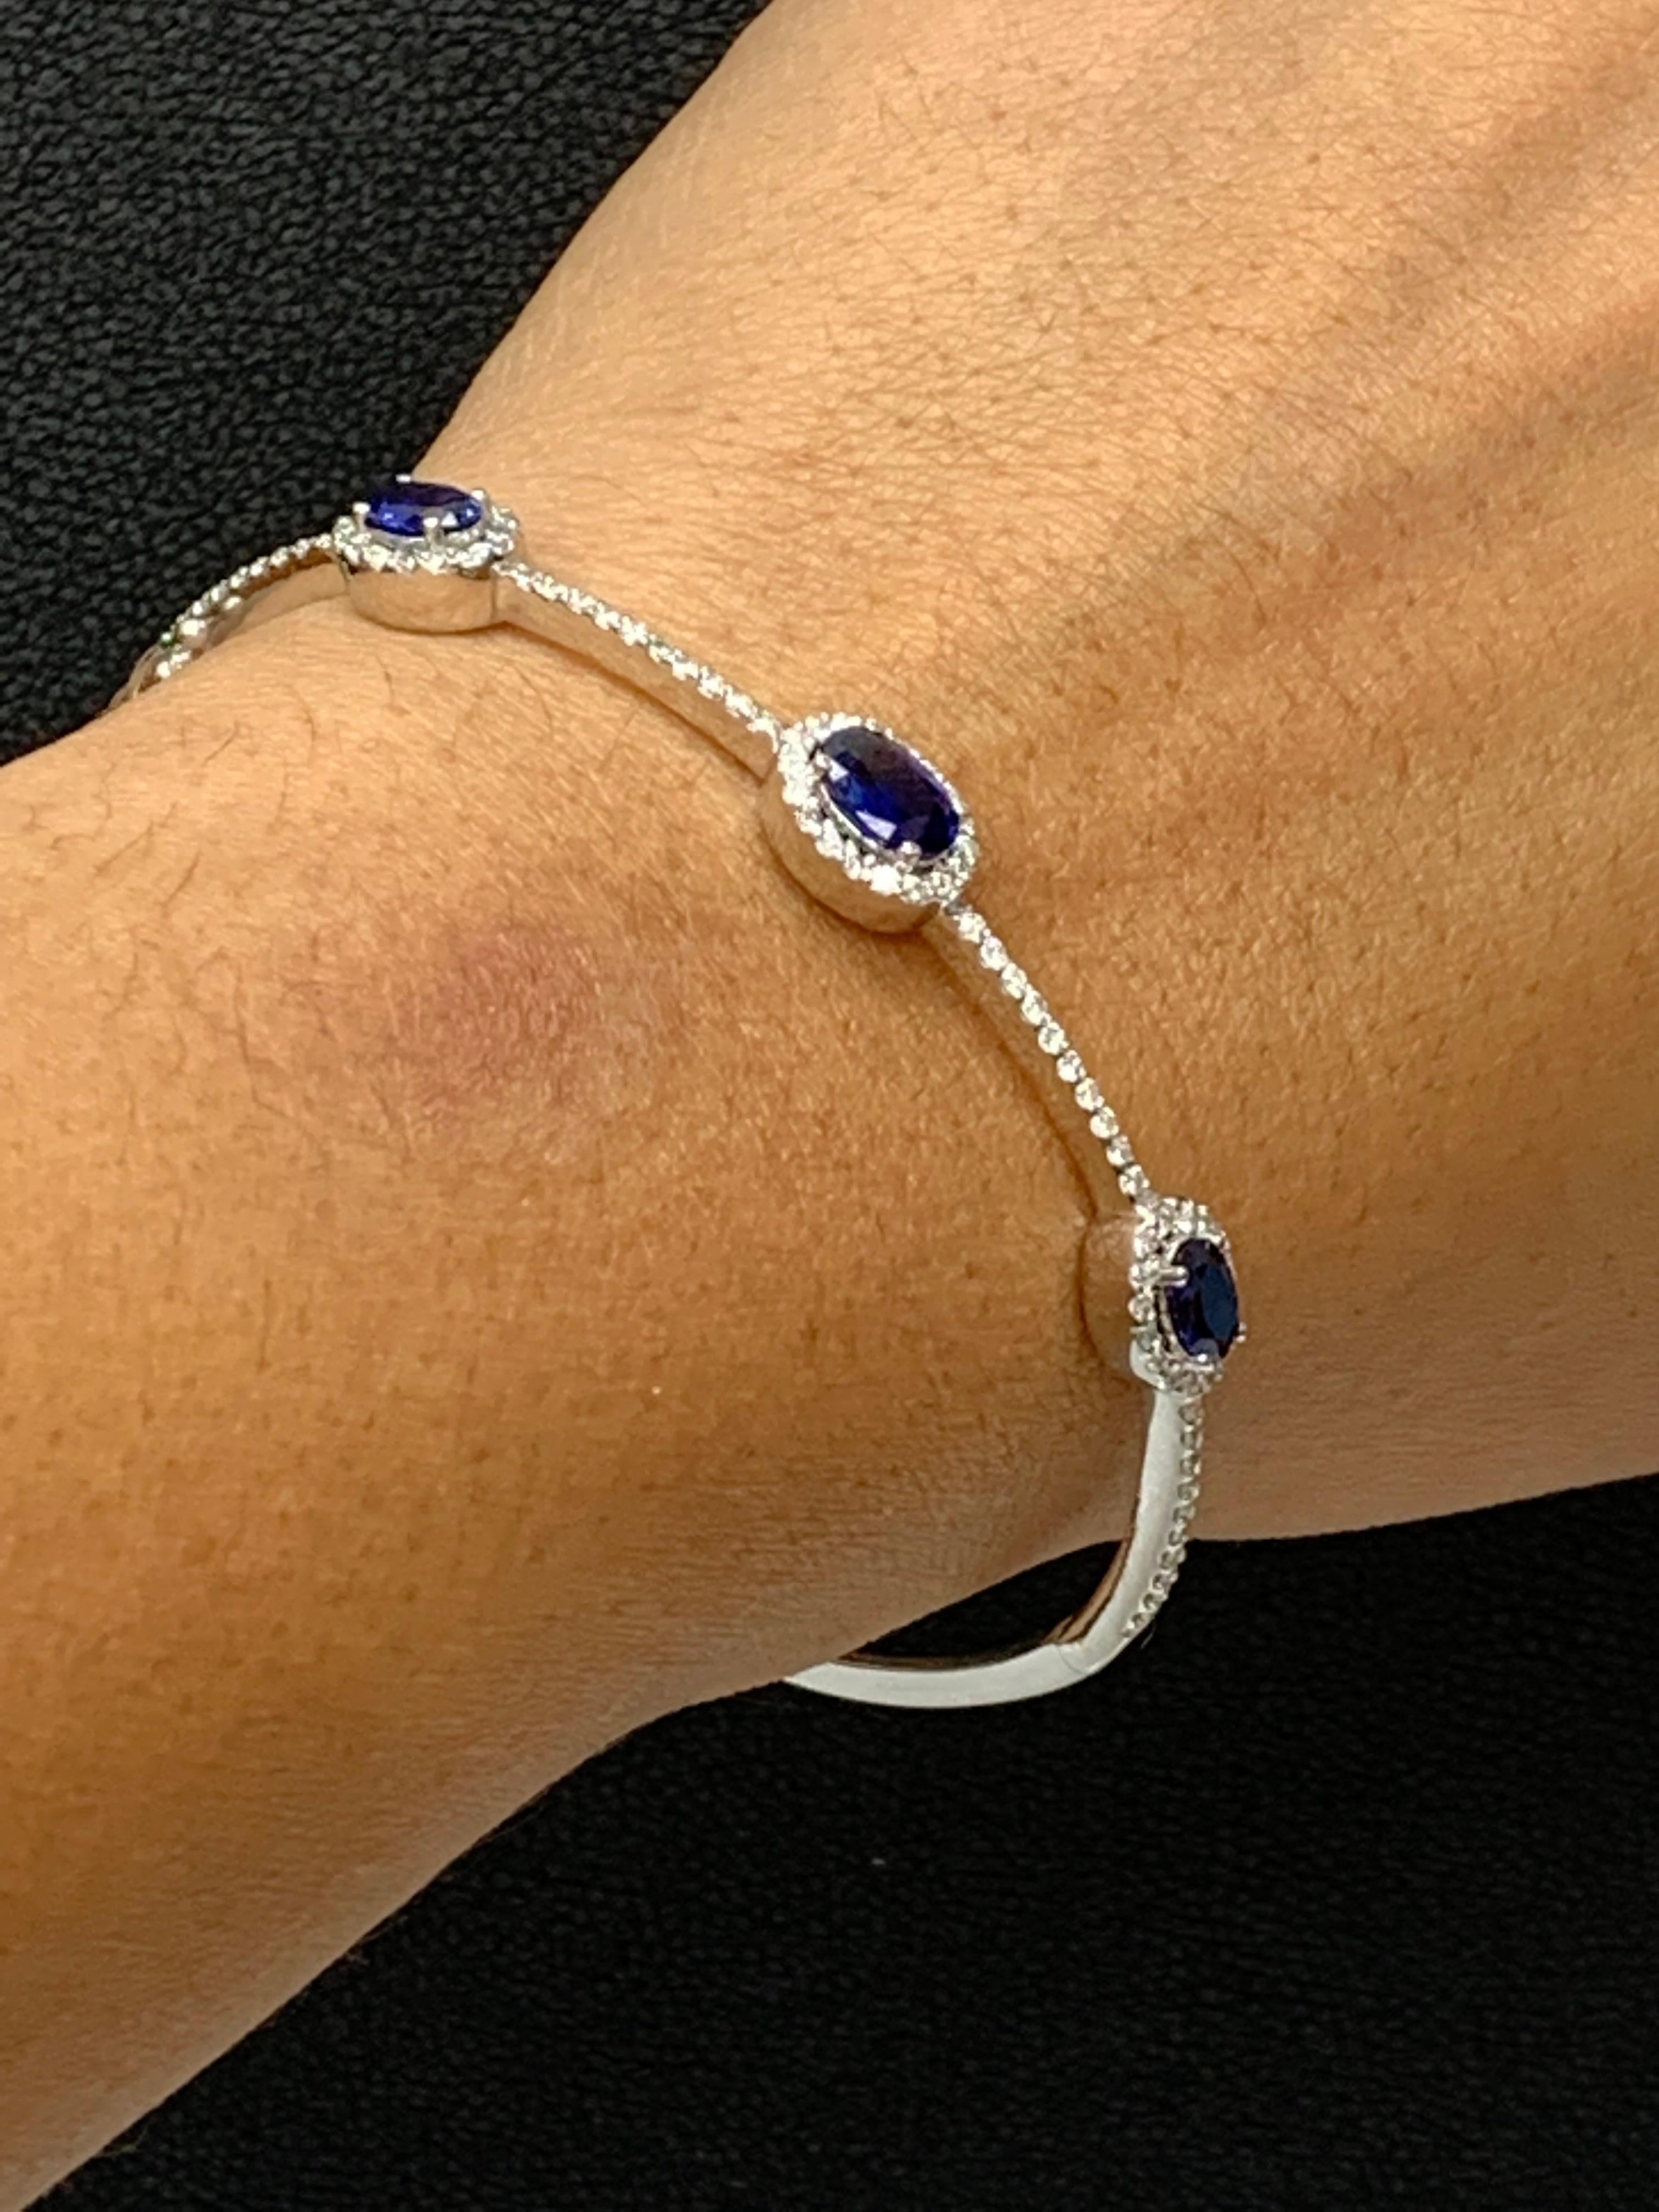 1.80 Carat Oval Cut Sapphire and Diamond Bangle Bracelet in 14K White Gold For Sale 5